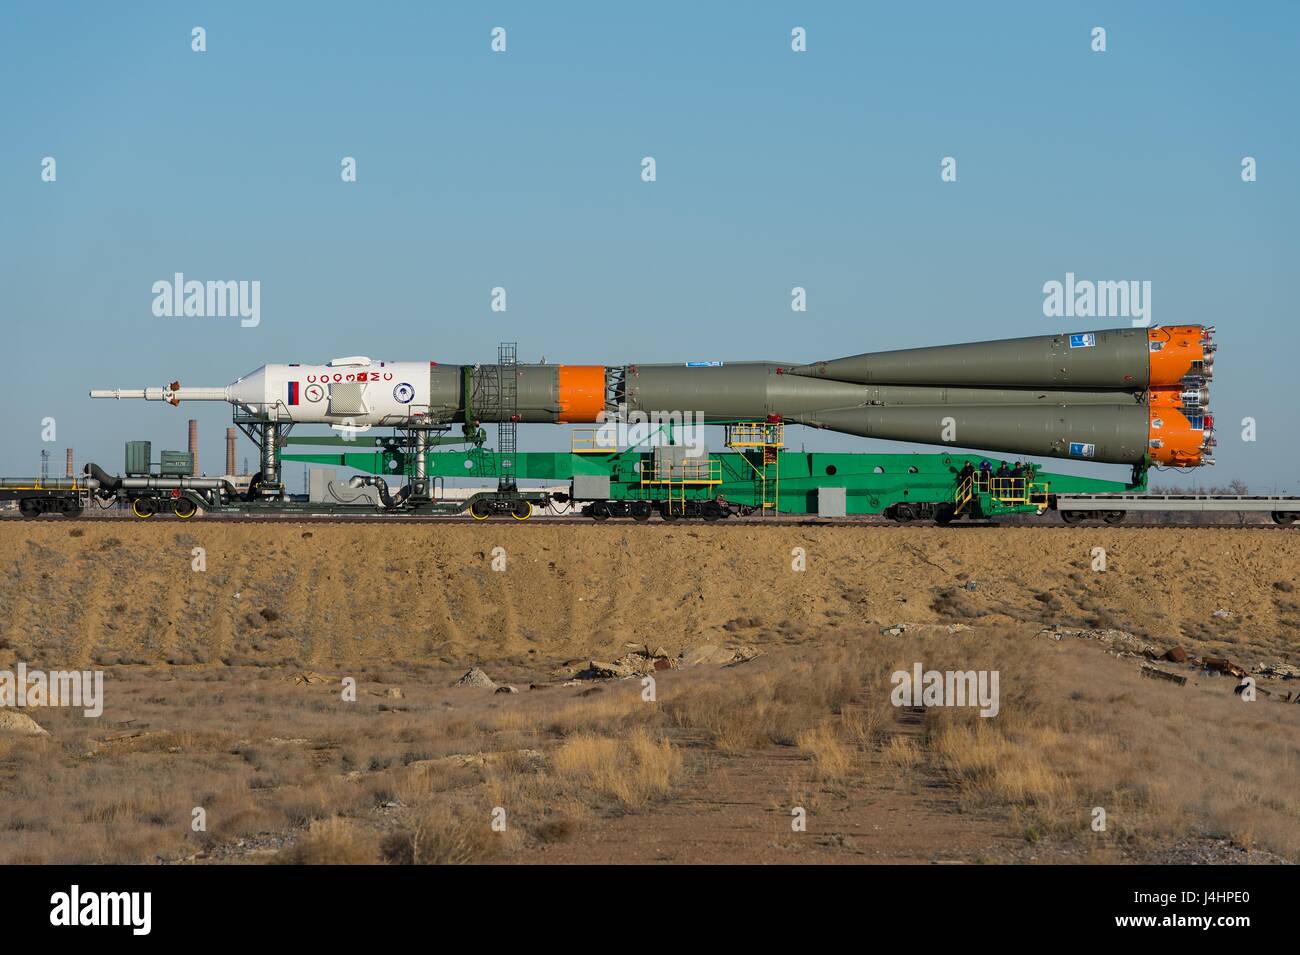 A train rolls the Soyuz MS-04 spacecraft rocket to the Baikonur Cosmodrome launch pad in preparation for the NASA International Space Station Expedition 51 launch April 17, 2017 in Baikonur, Kazakhstan.     (photo by Aubrey Gemignani /NASA   via Planetpix) Stock Photo